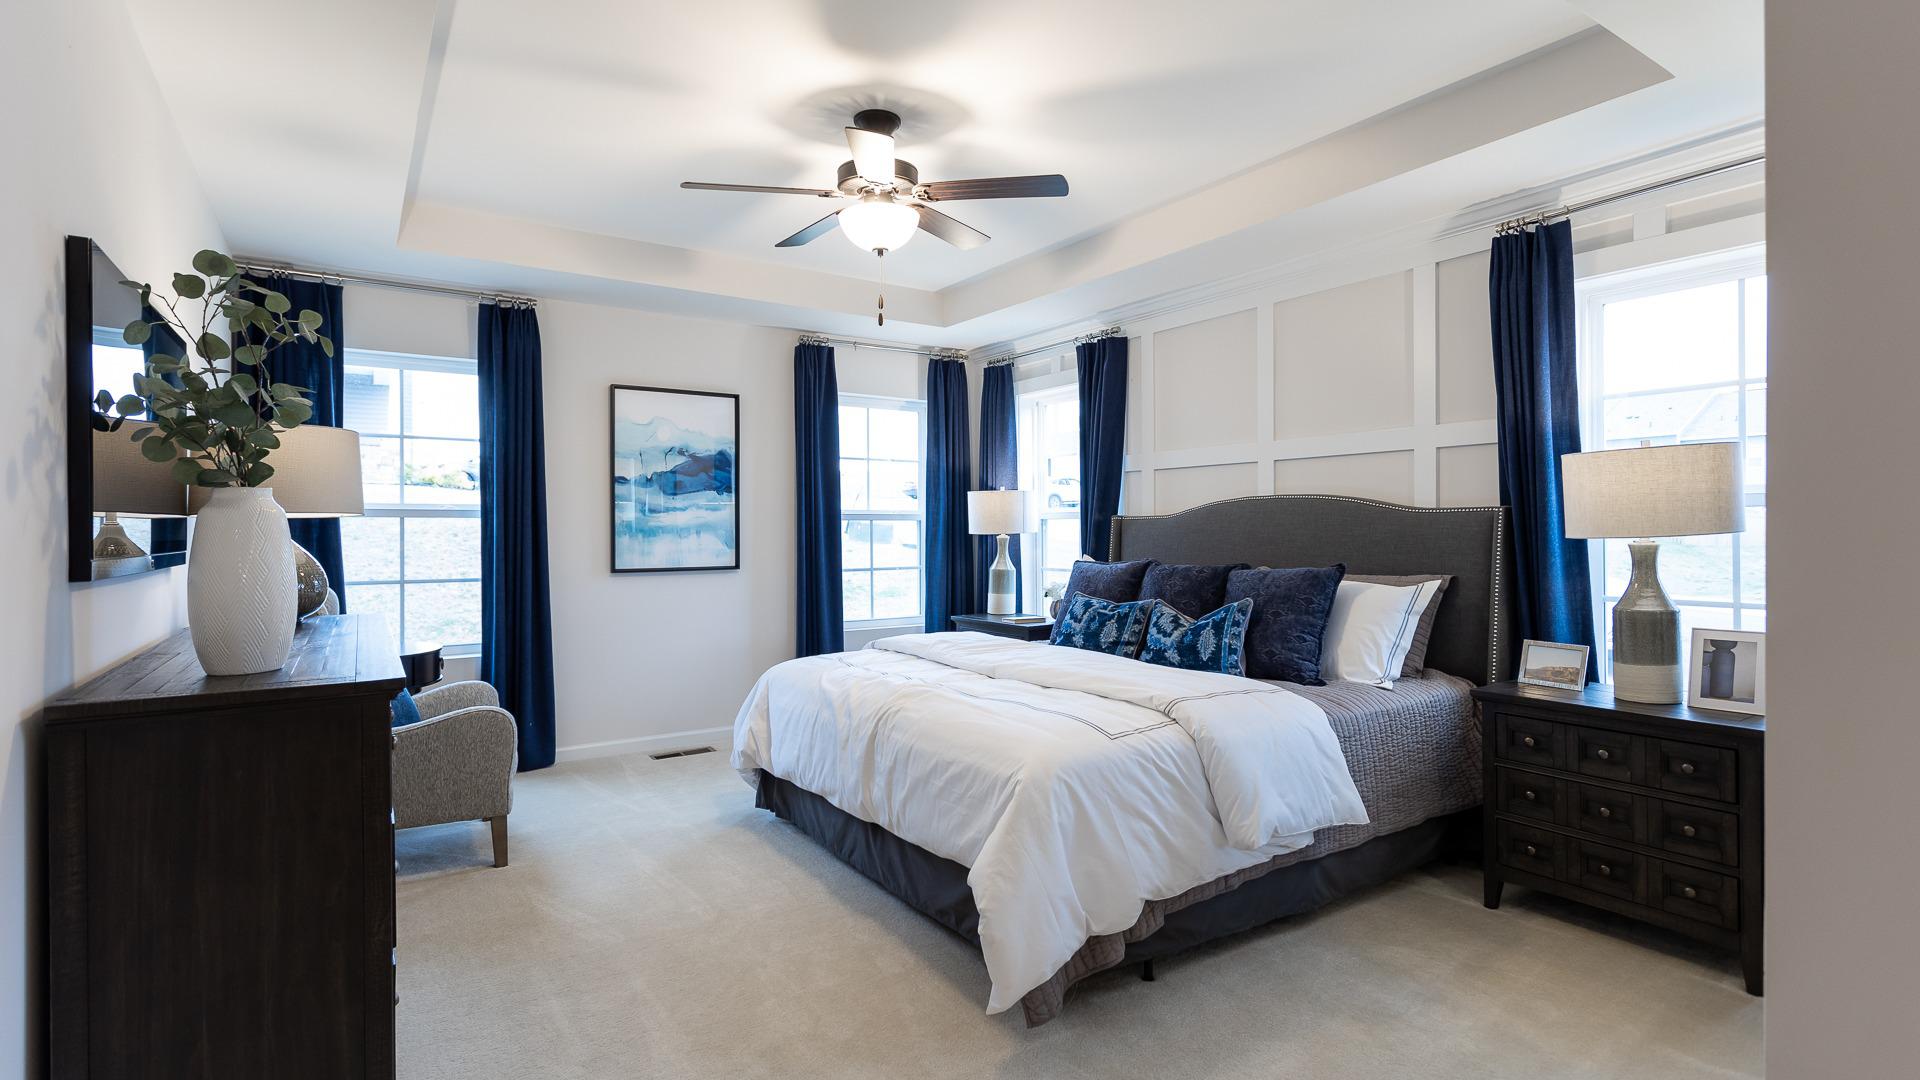 Owners' suite with king side bed, tray ceiling, four windows and ceiling fan in DRB Homes The Village of College Park